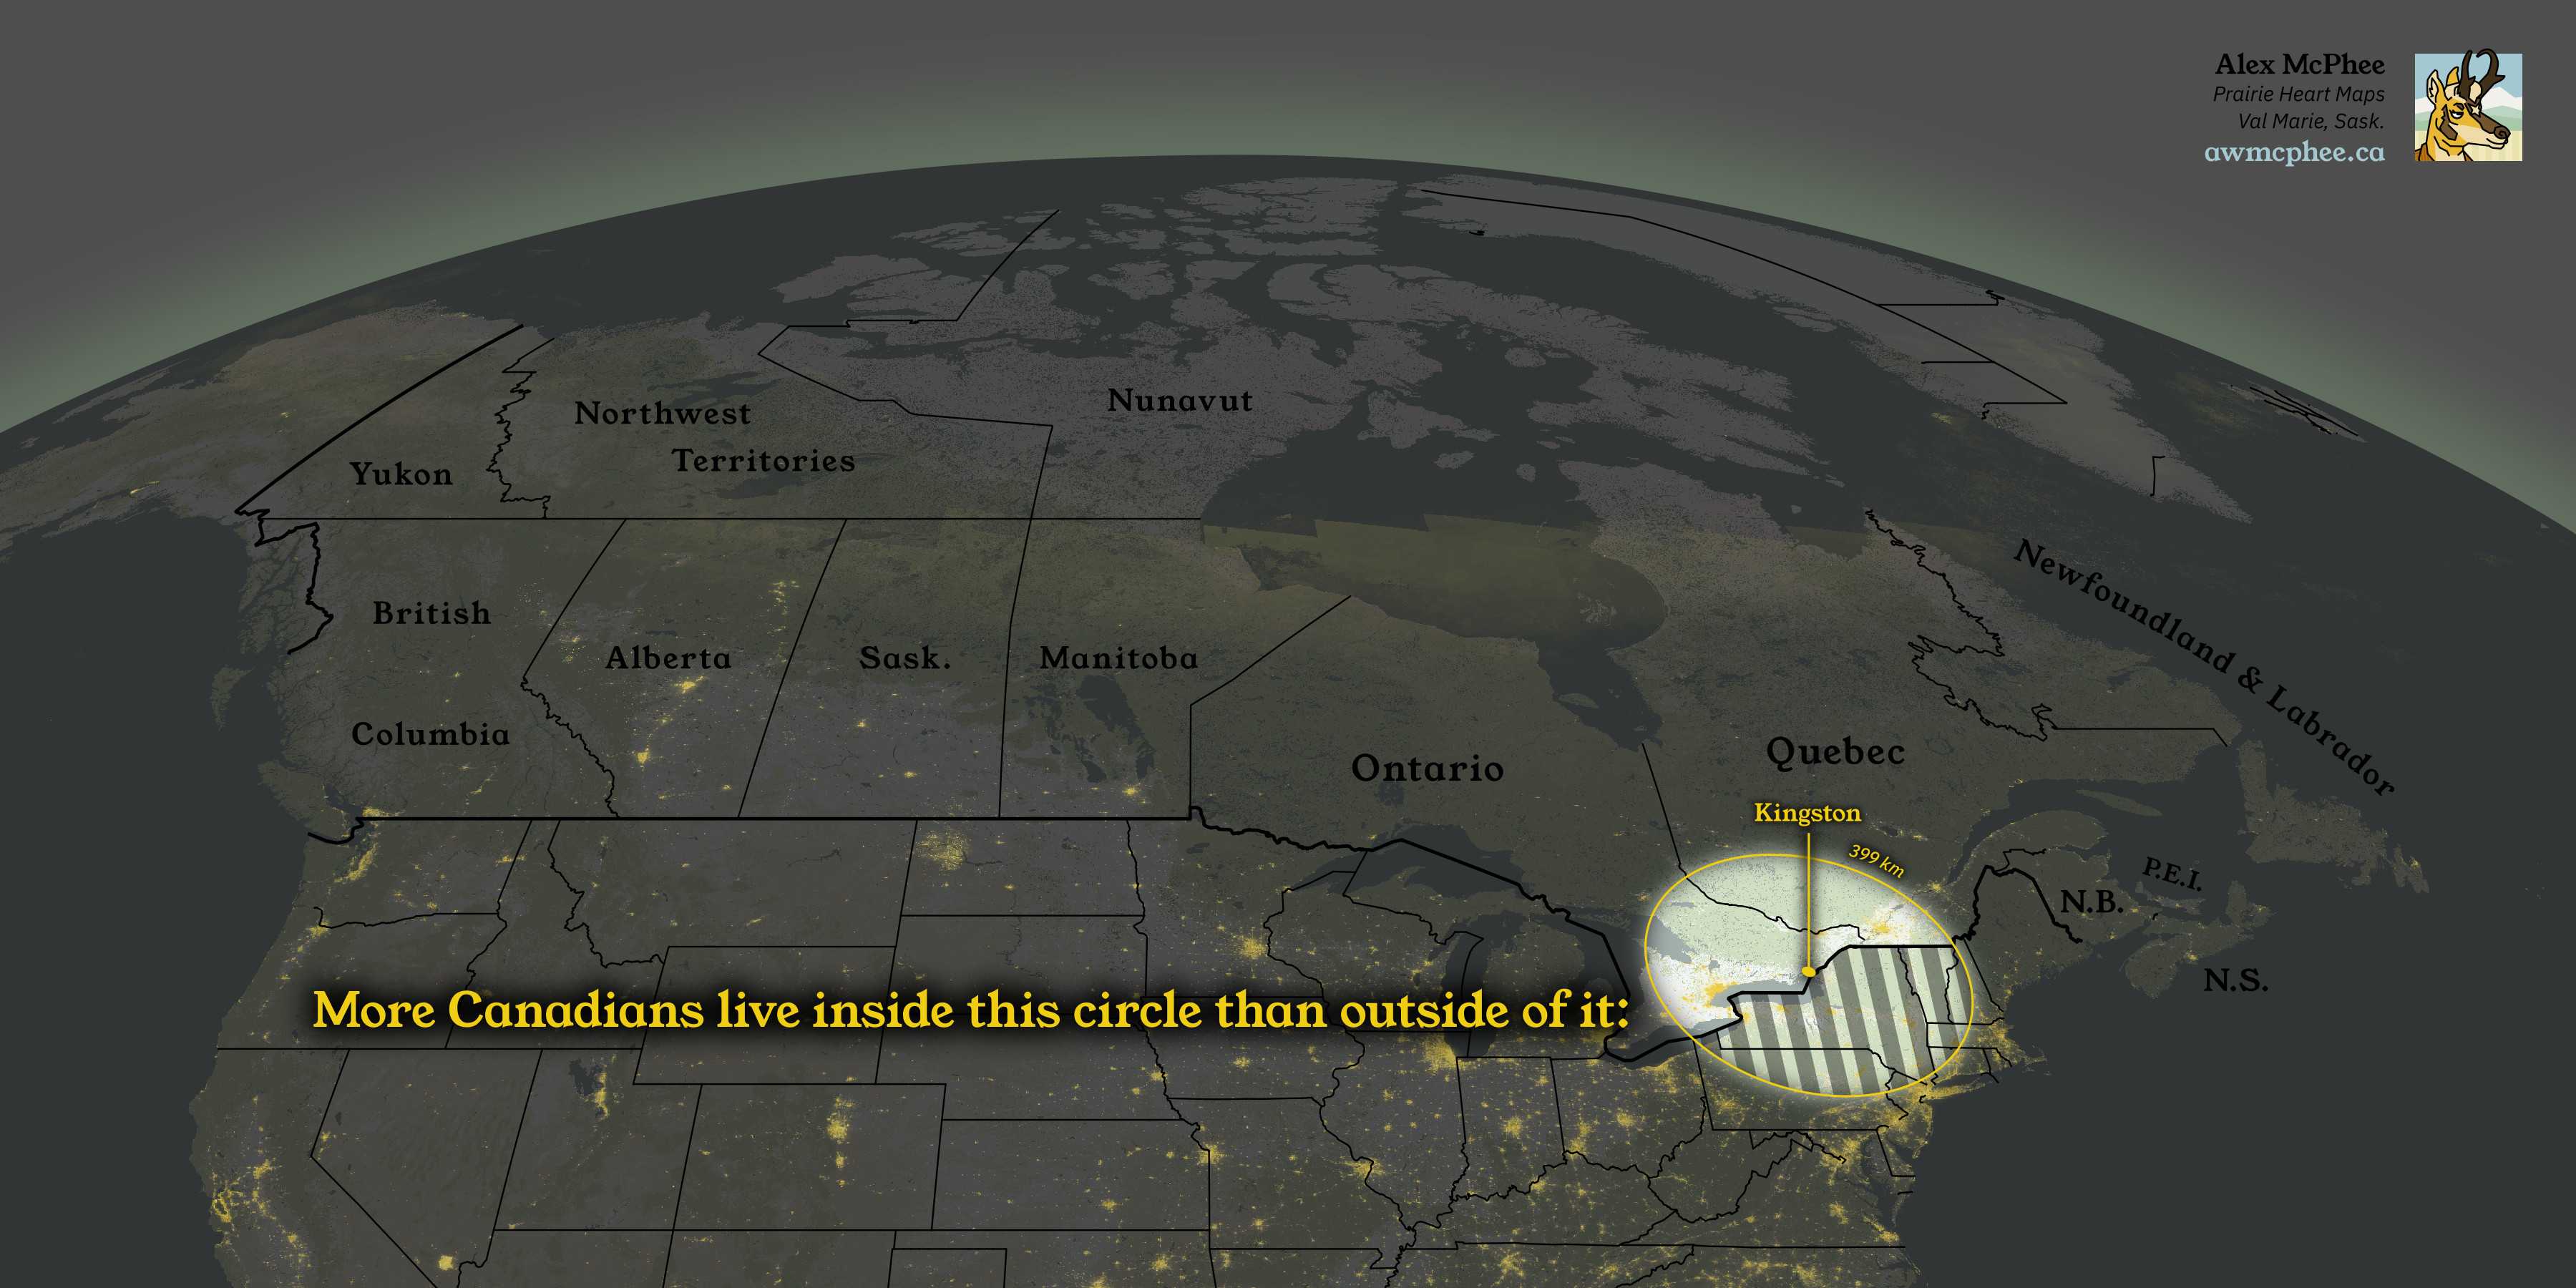 A map showing the smallest circle that encloses 50% of Canada's population.